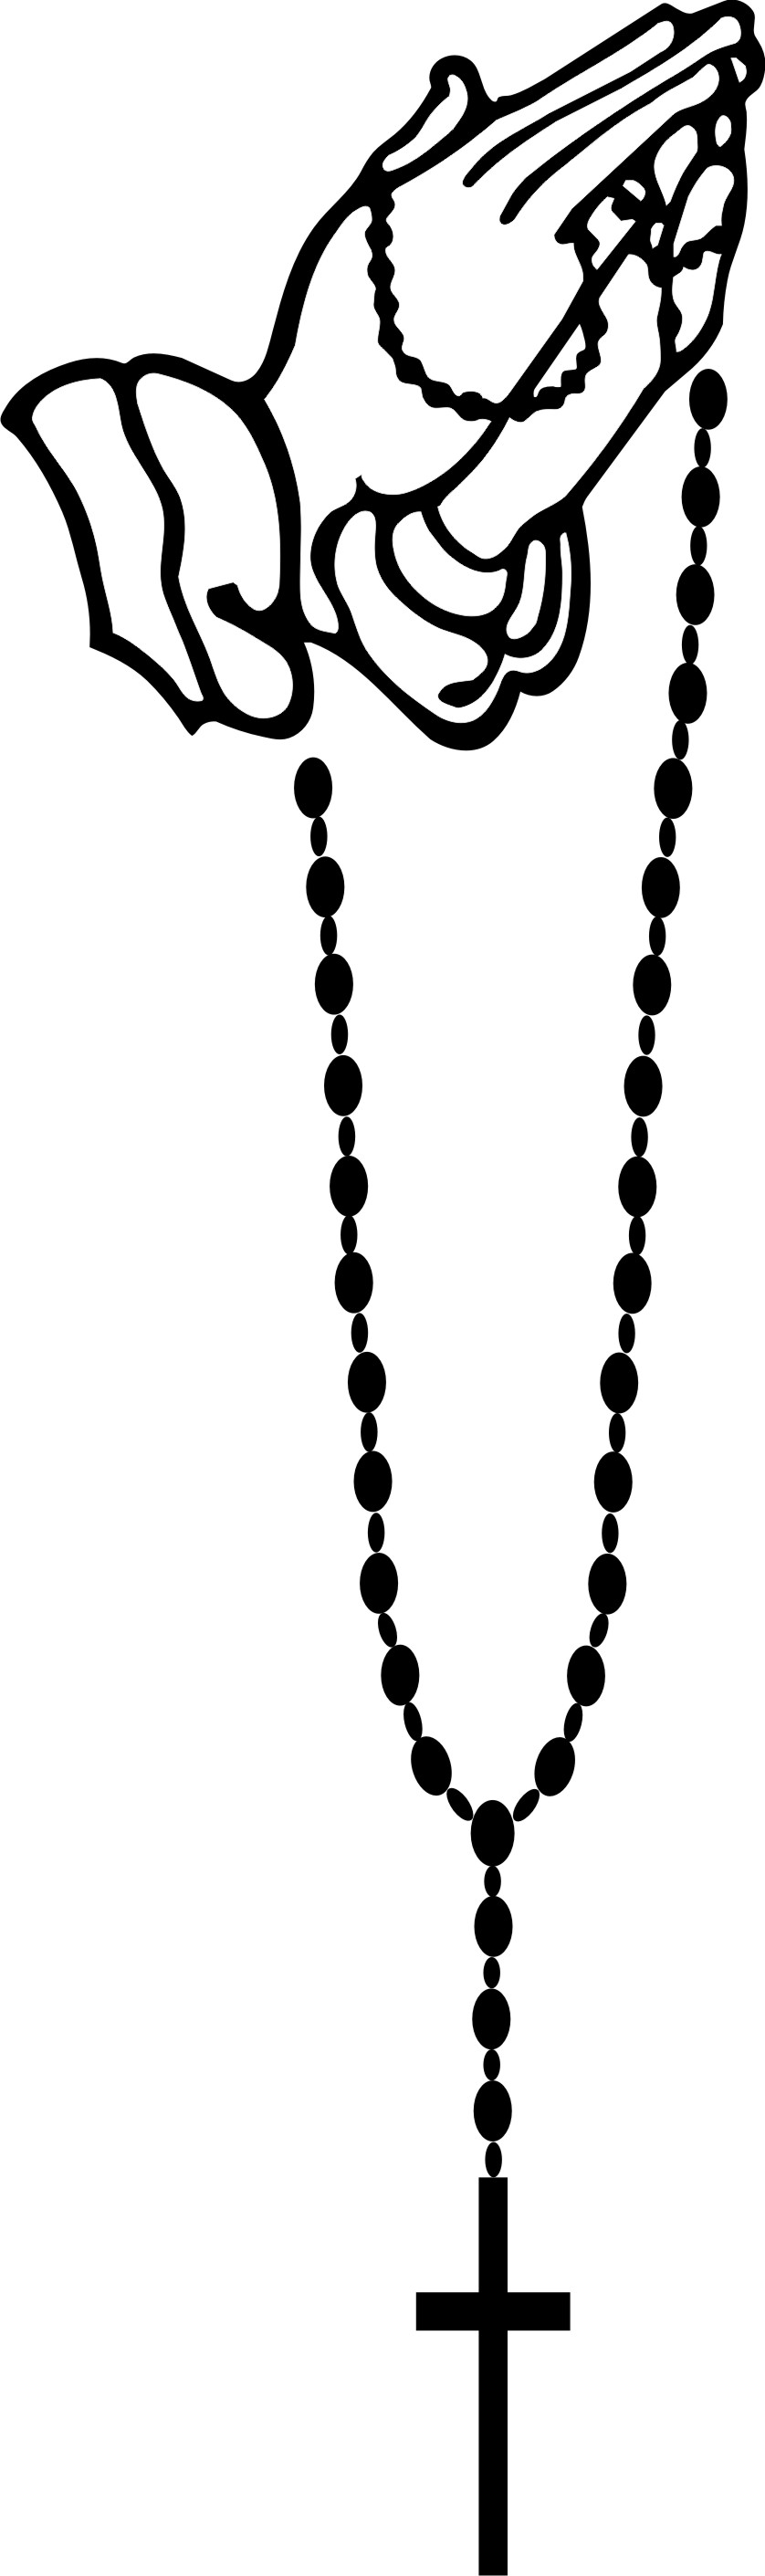 Rosary - Clipart library. Ros